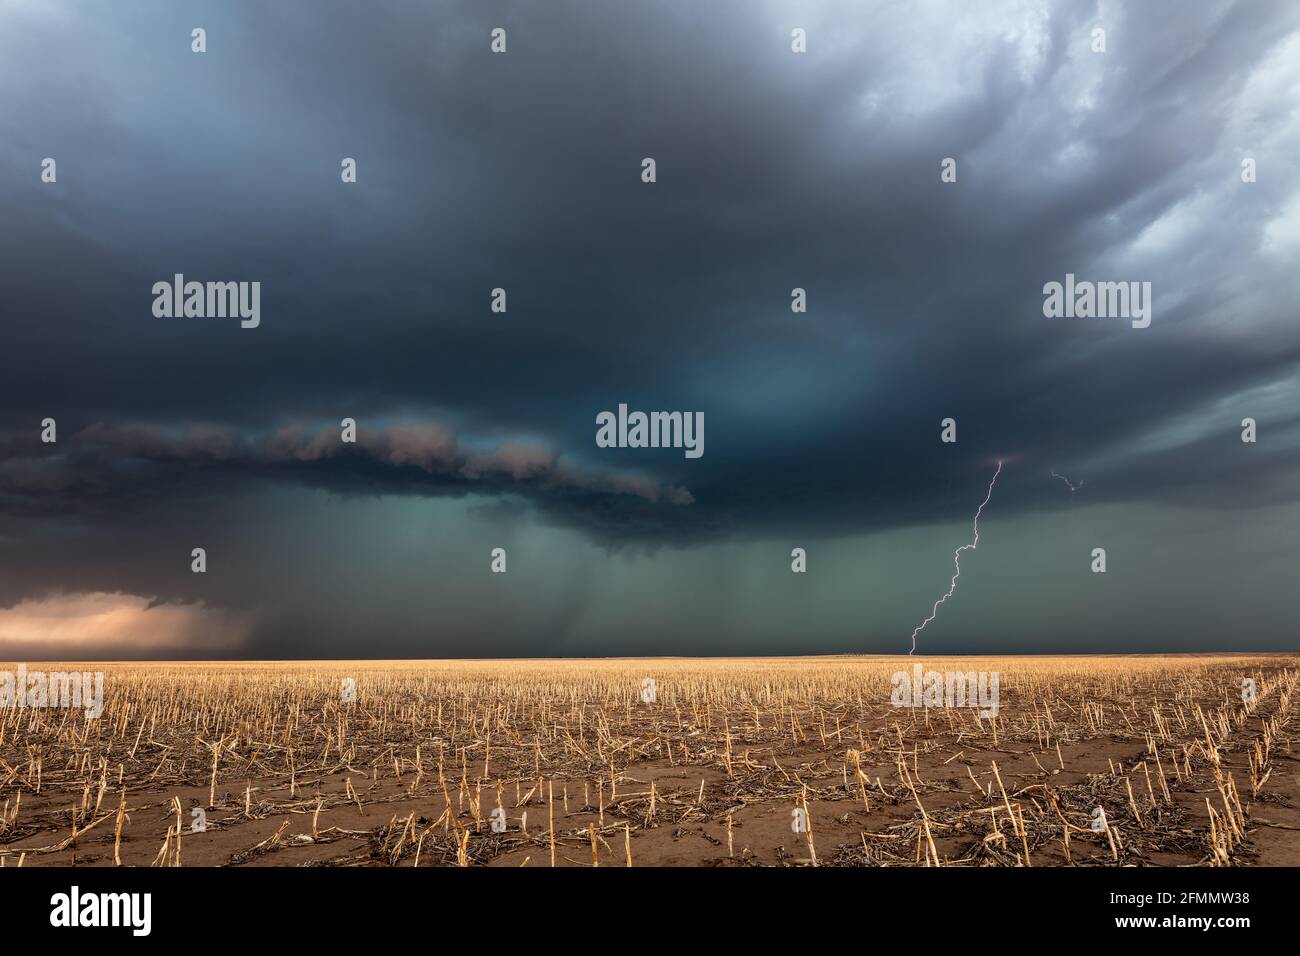 Lightning strike from a severe thunderstorm with ominous storm clouds near Colby, Kansas Stock Photo